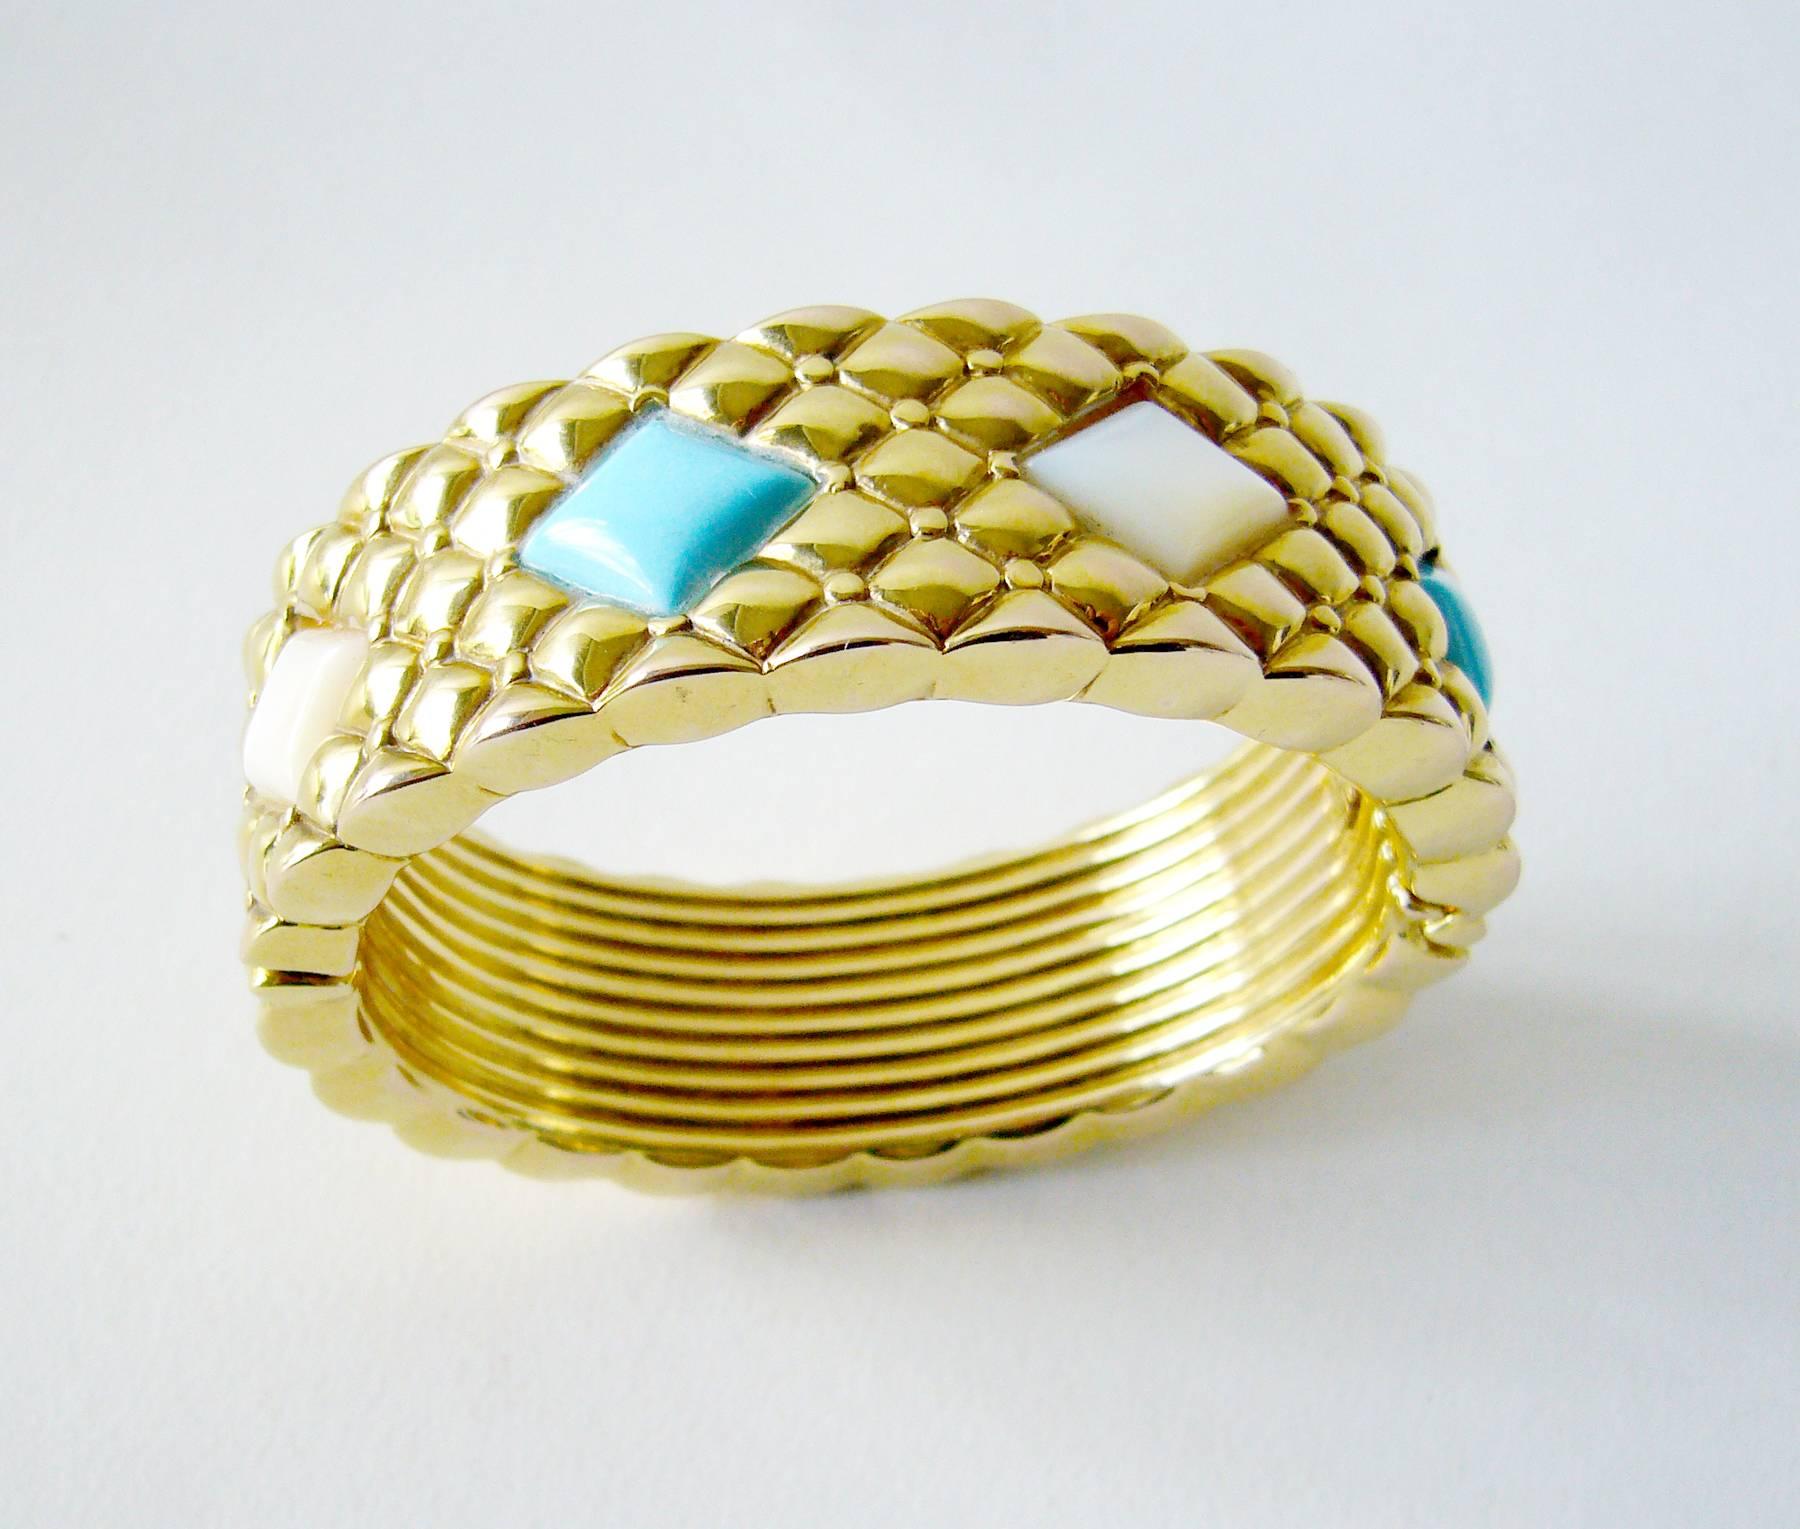 Italian creator hollow 14kt. gold, Persian turquoise and mother of pearl hinged bracelet with quilted diamond shaped design.  Bracelet consists of eight large diamond shaped gemstones.  Measuring about 1" wide and will fit up to a 7" wrist